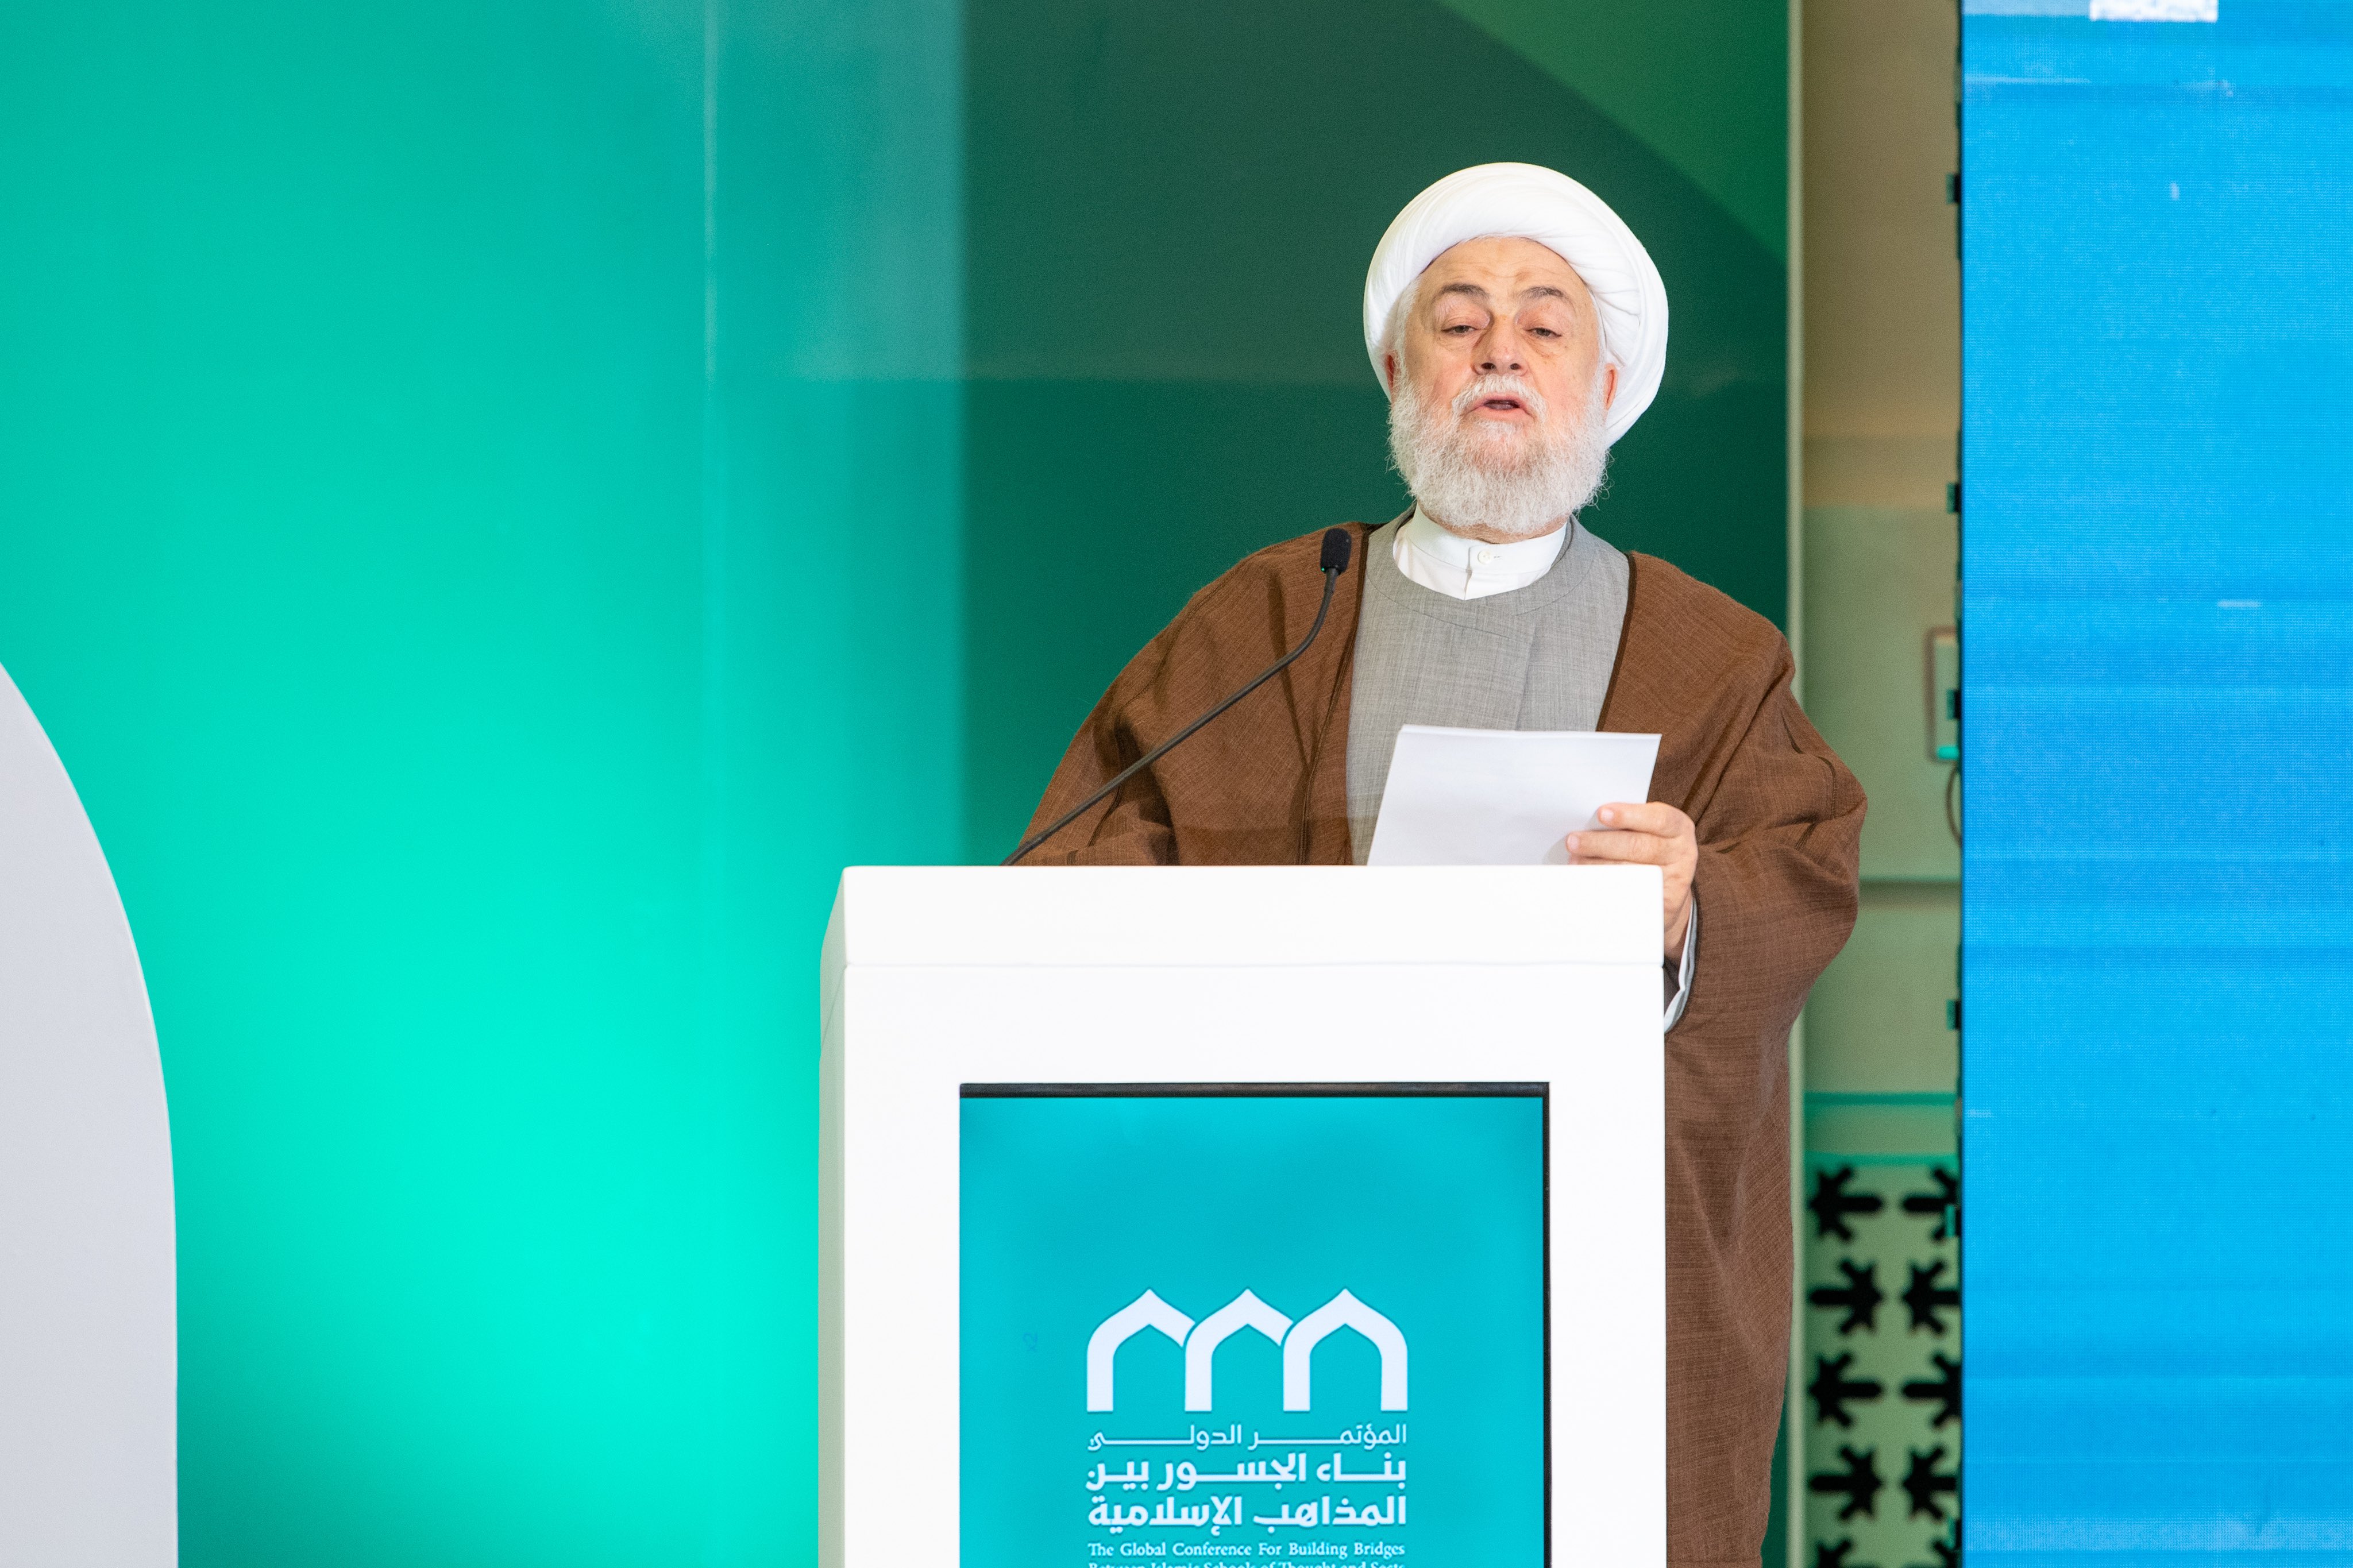 His Eminence Sheikh Mohammed Osseiran, Mufti of Sidon, Lebanon, in his speech during the closing session at the Global Conference for Building Bridges between Islamic Schools of Thought and Sects